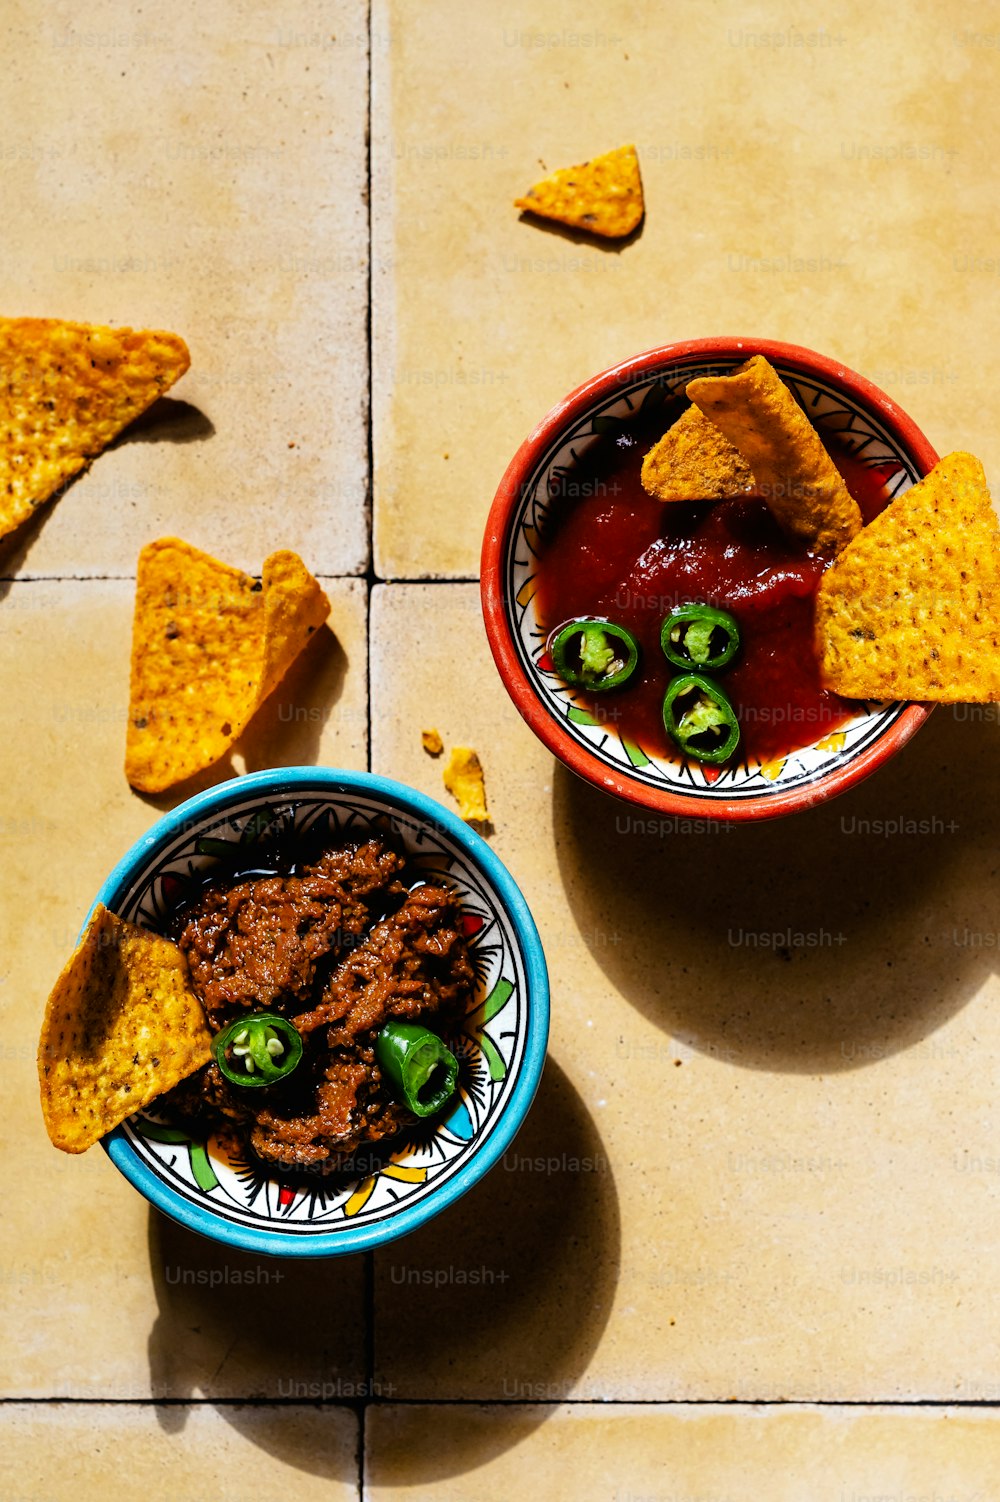 two bowls of chili and tortilla chips on a tile floor